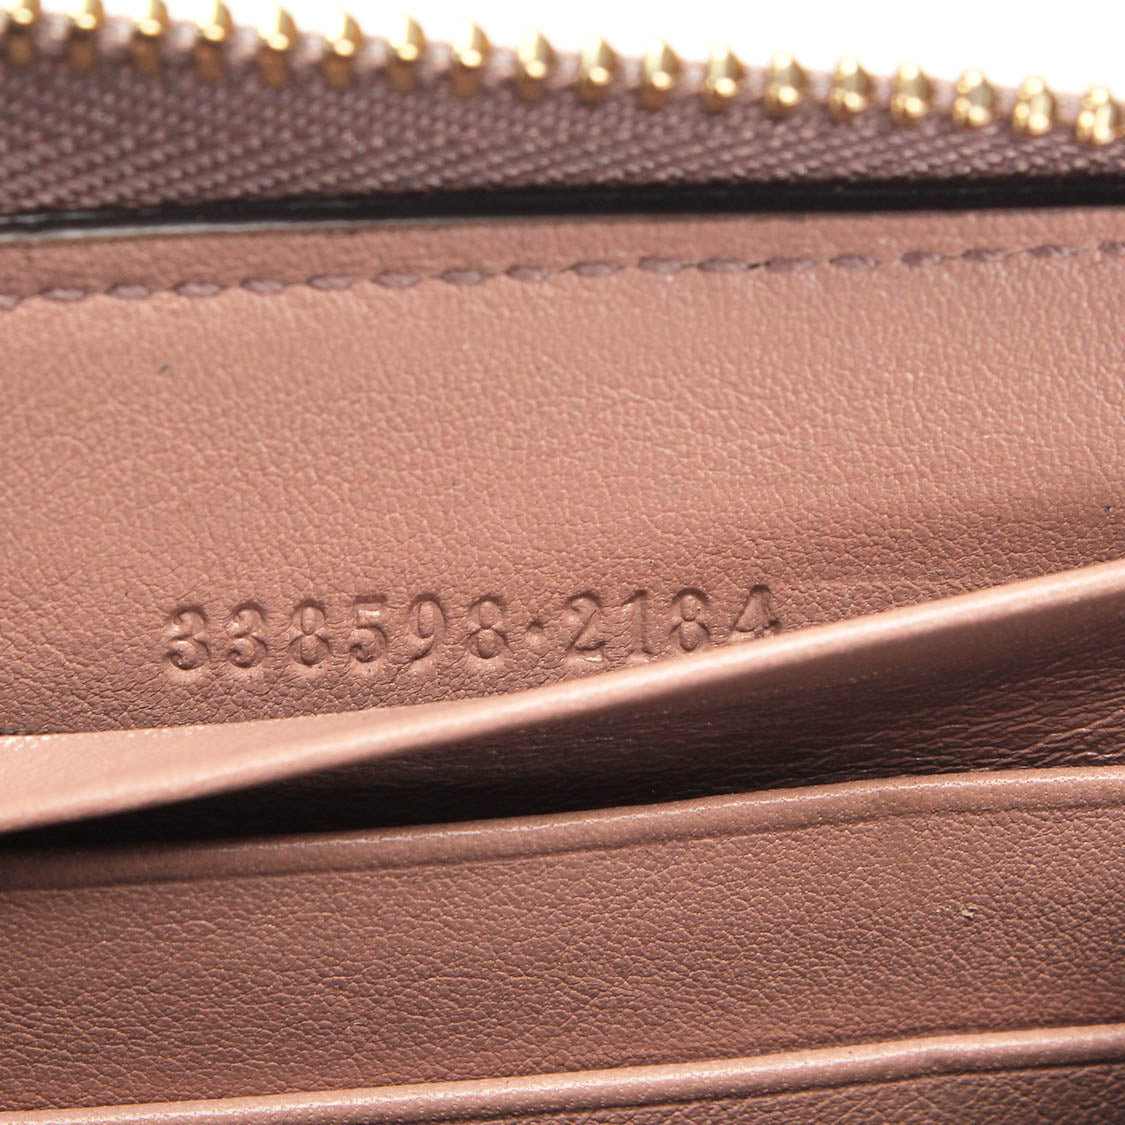 Microguccissima Trimmed Long Wallet